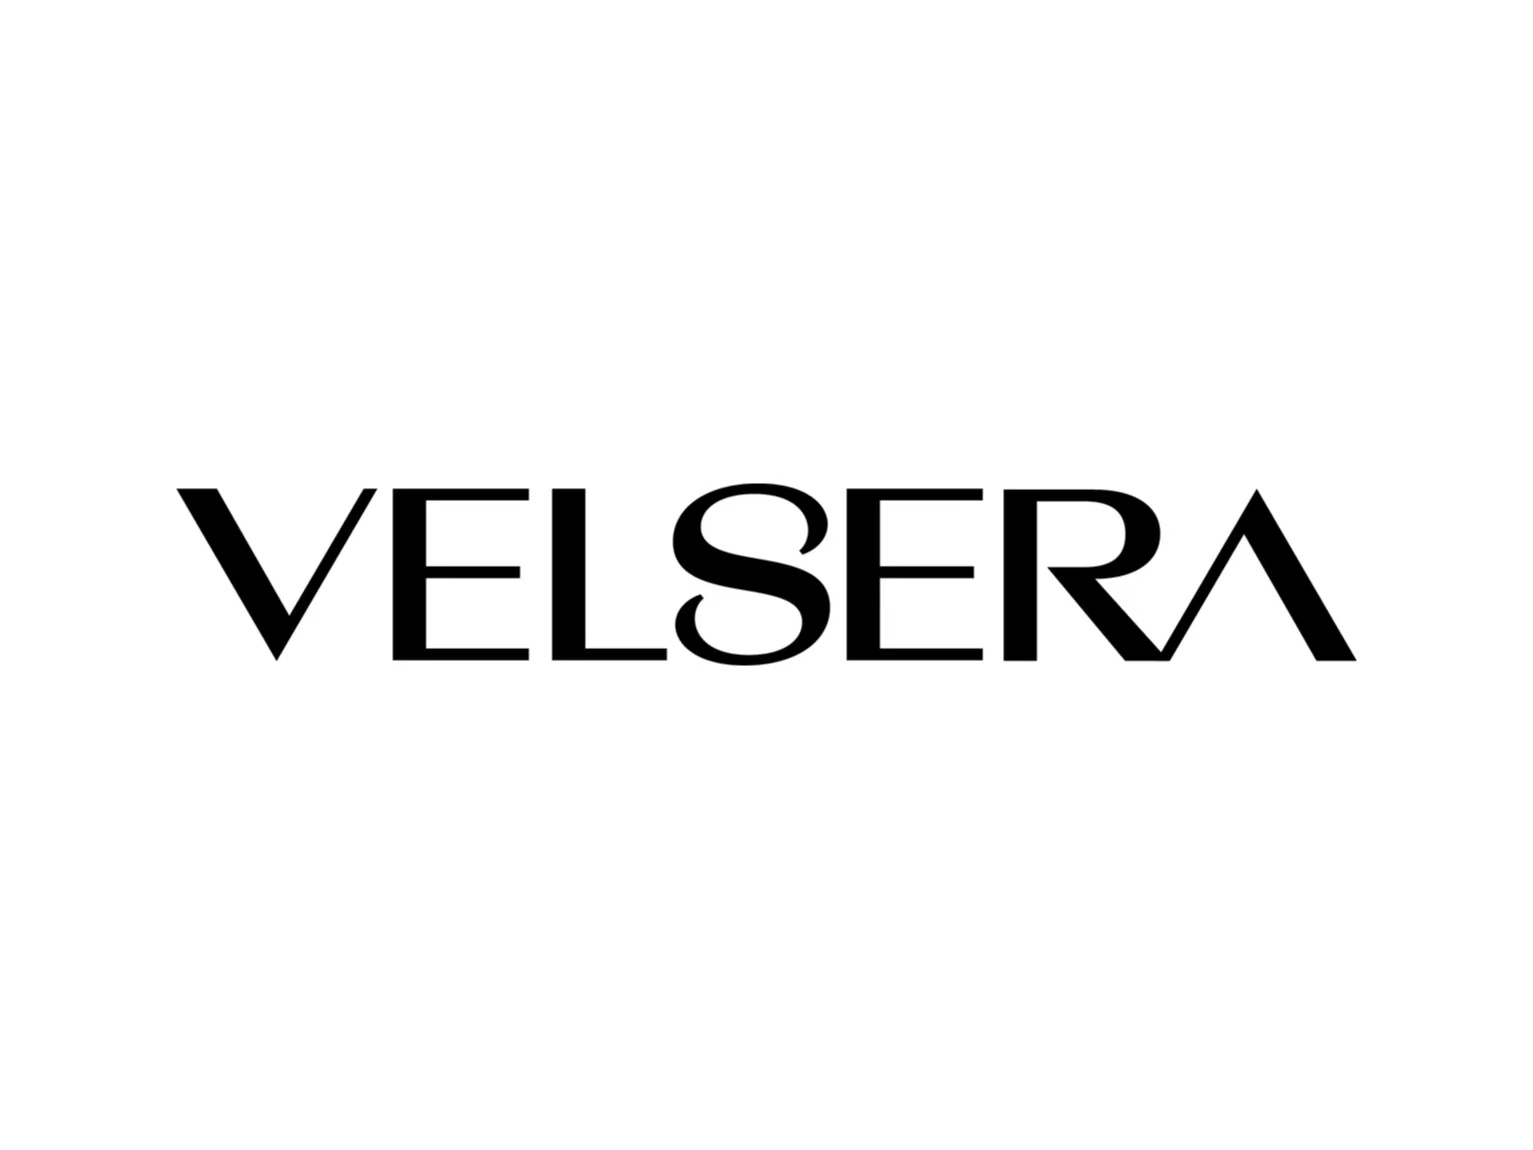 Pierian, Seven Bridges, UgenTec Acquired, Merged to Become Velsera